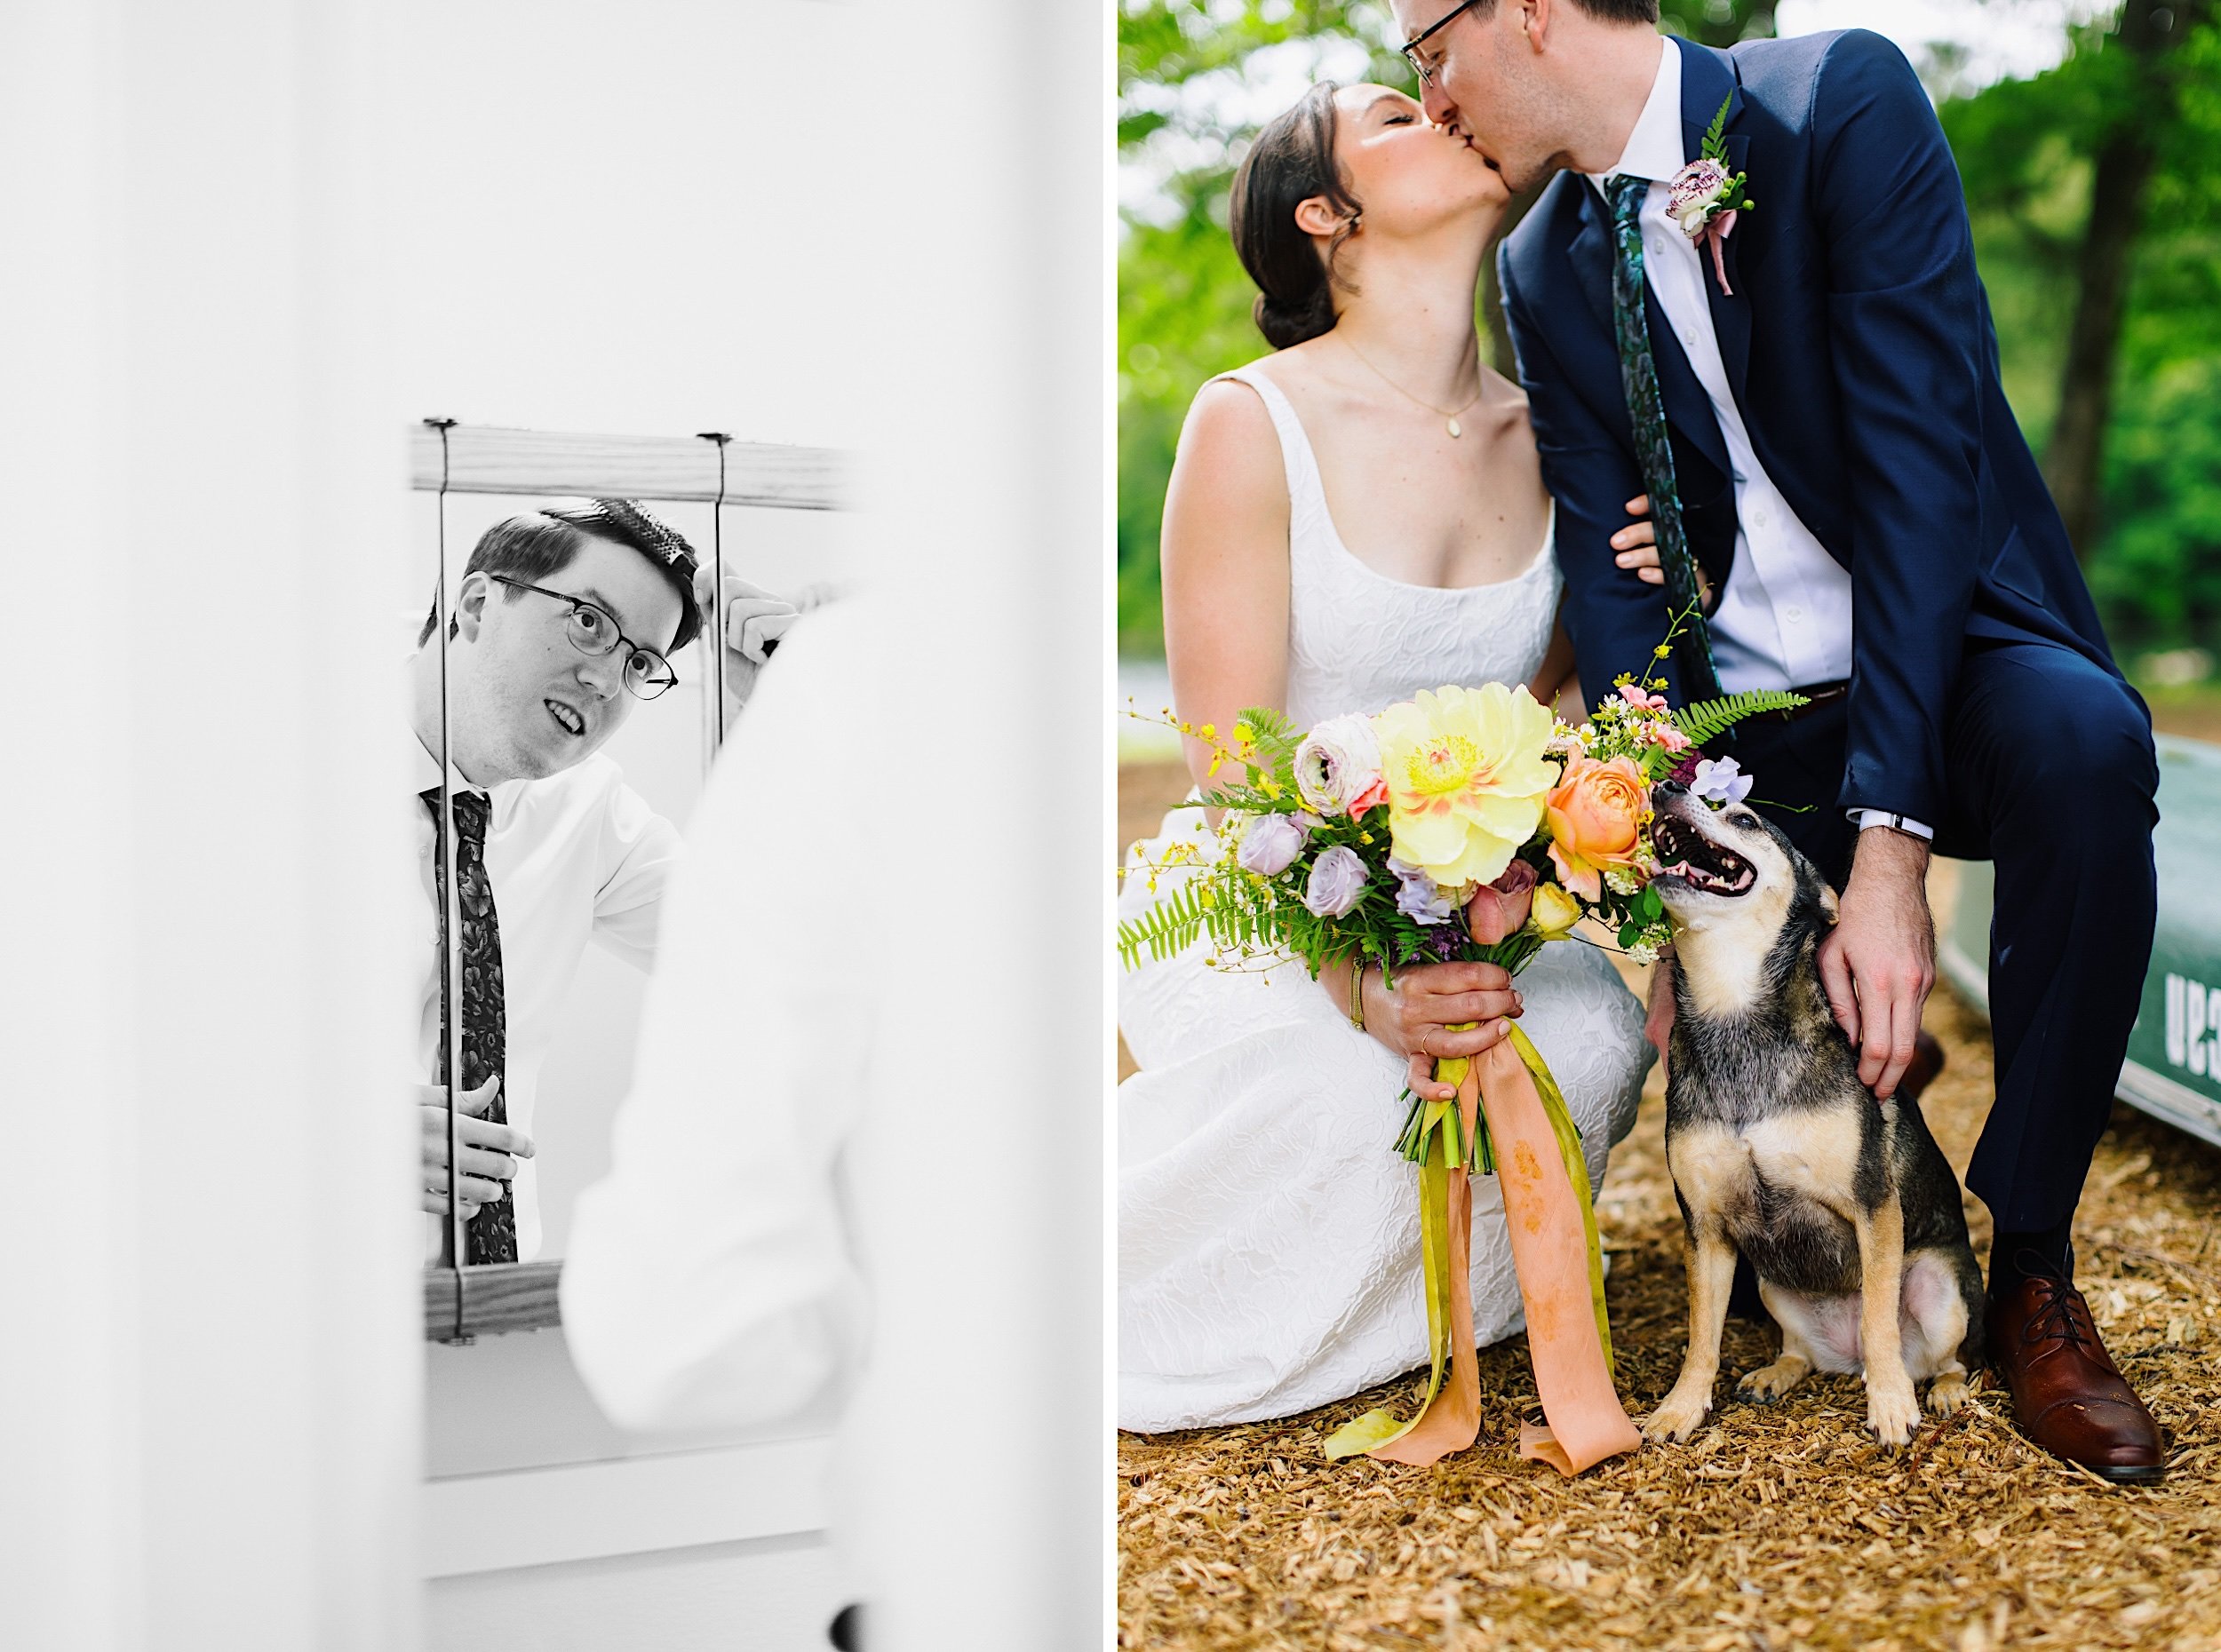 033-ZacWolfPhotography-20220611-Blog_032-ZacWolfPhotography-20220611-Blog_Bride-and-Groom-with-dog-on-wedding-day_Groom-getting-ready-.jpg